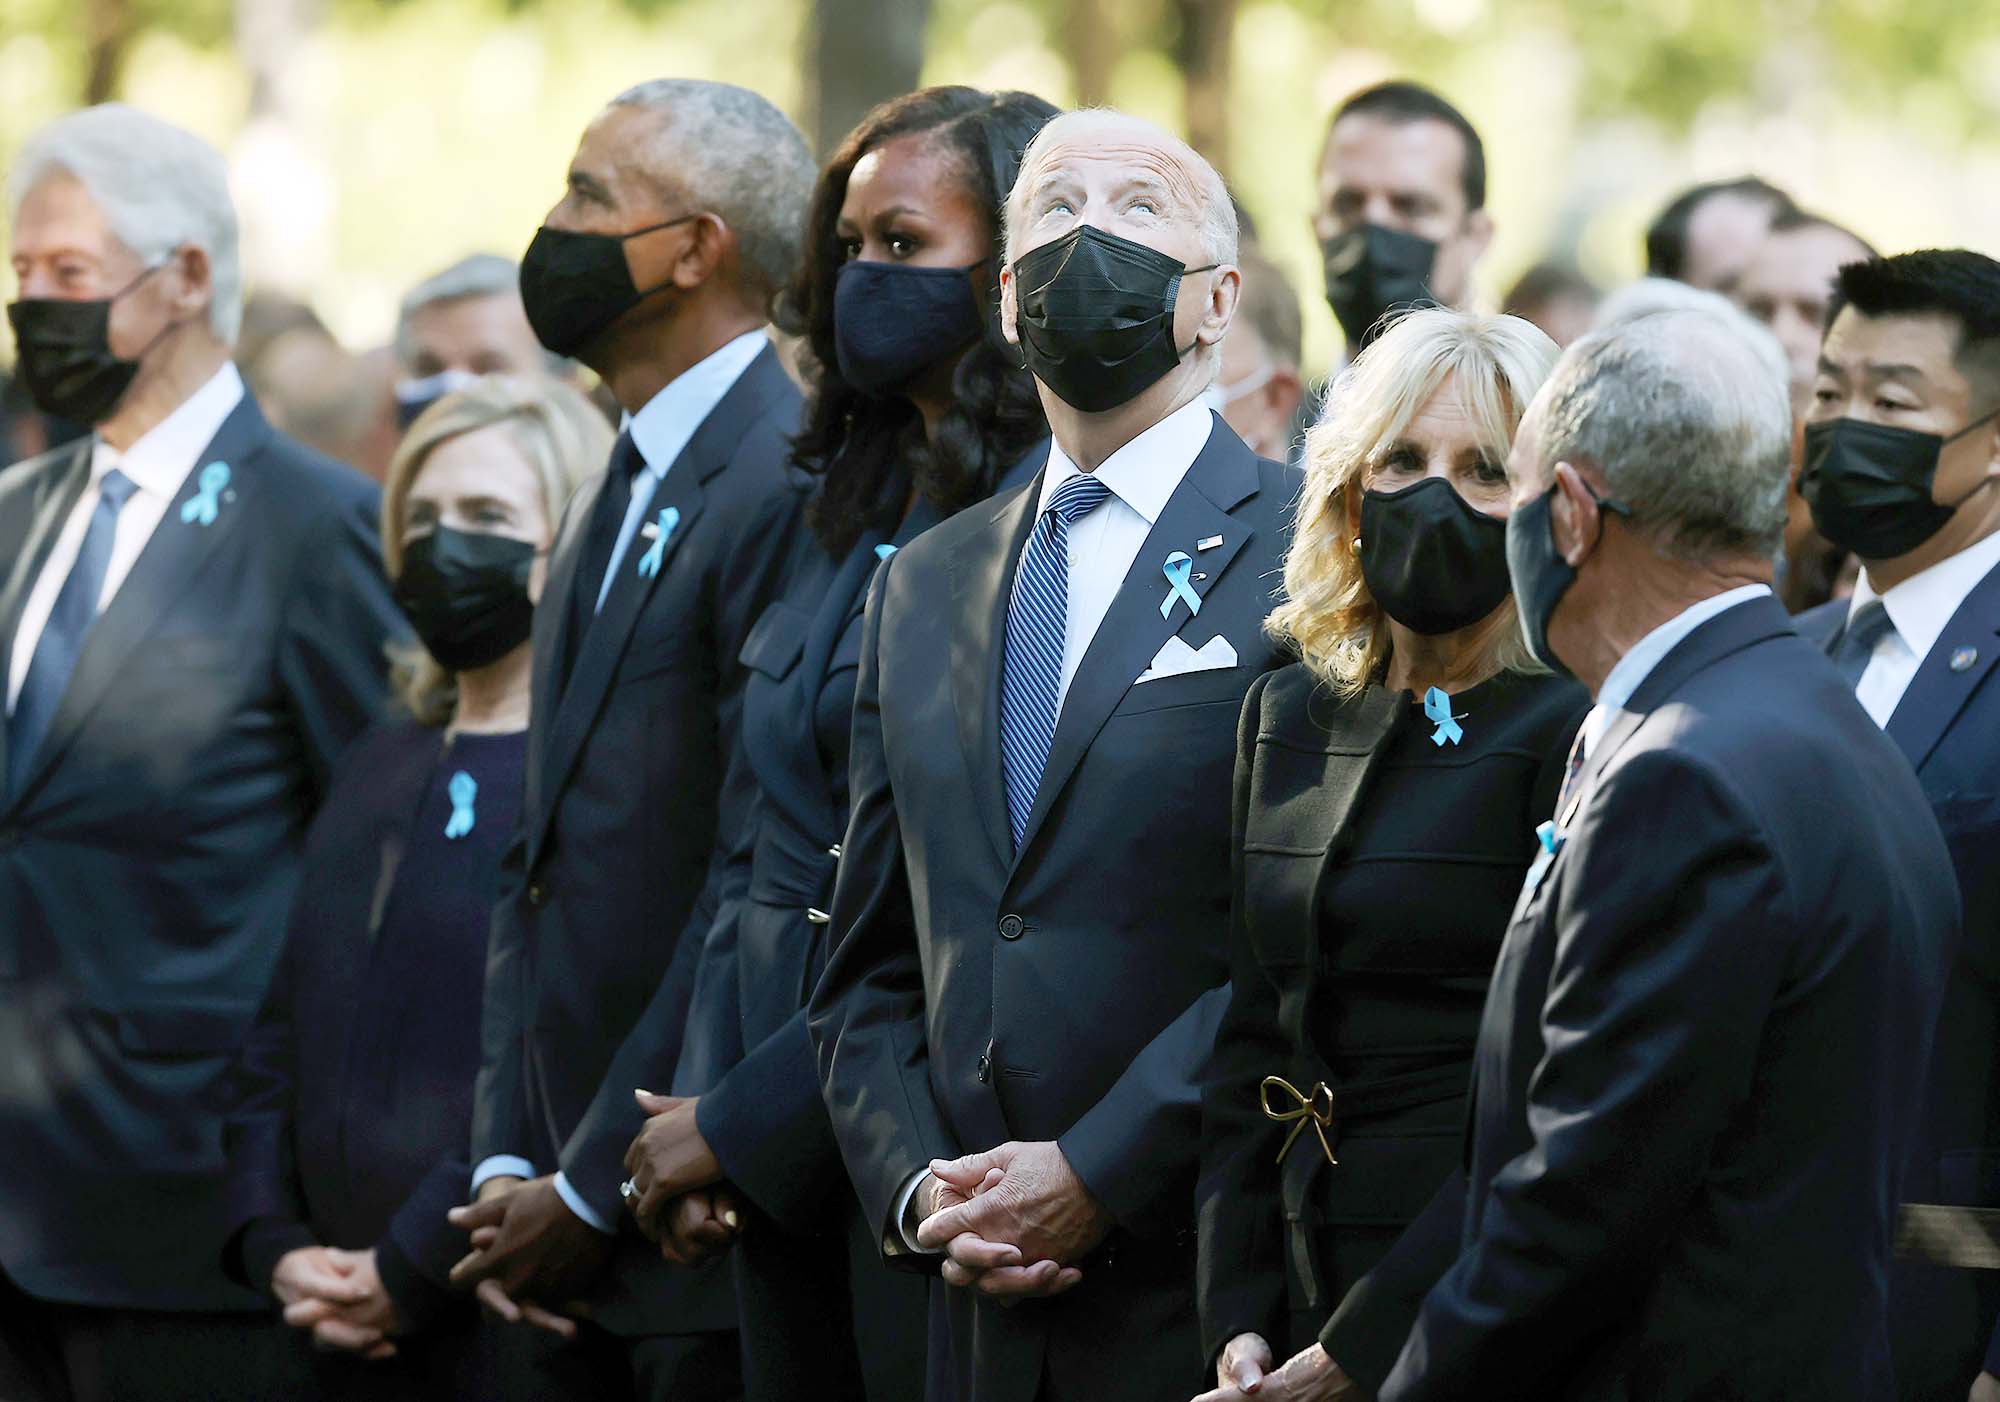 PHOTO: Former President Bill Clinton, former First Lady Hillary Clinton, former President Barack Obama, former First Lady Michelle Obama, President Joe Biden and First Lady Jill Biden attend the 9/11 Commemoration Ceremony in New York, Sept. 11, 2021.